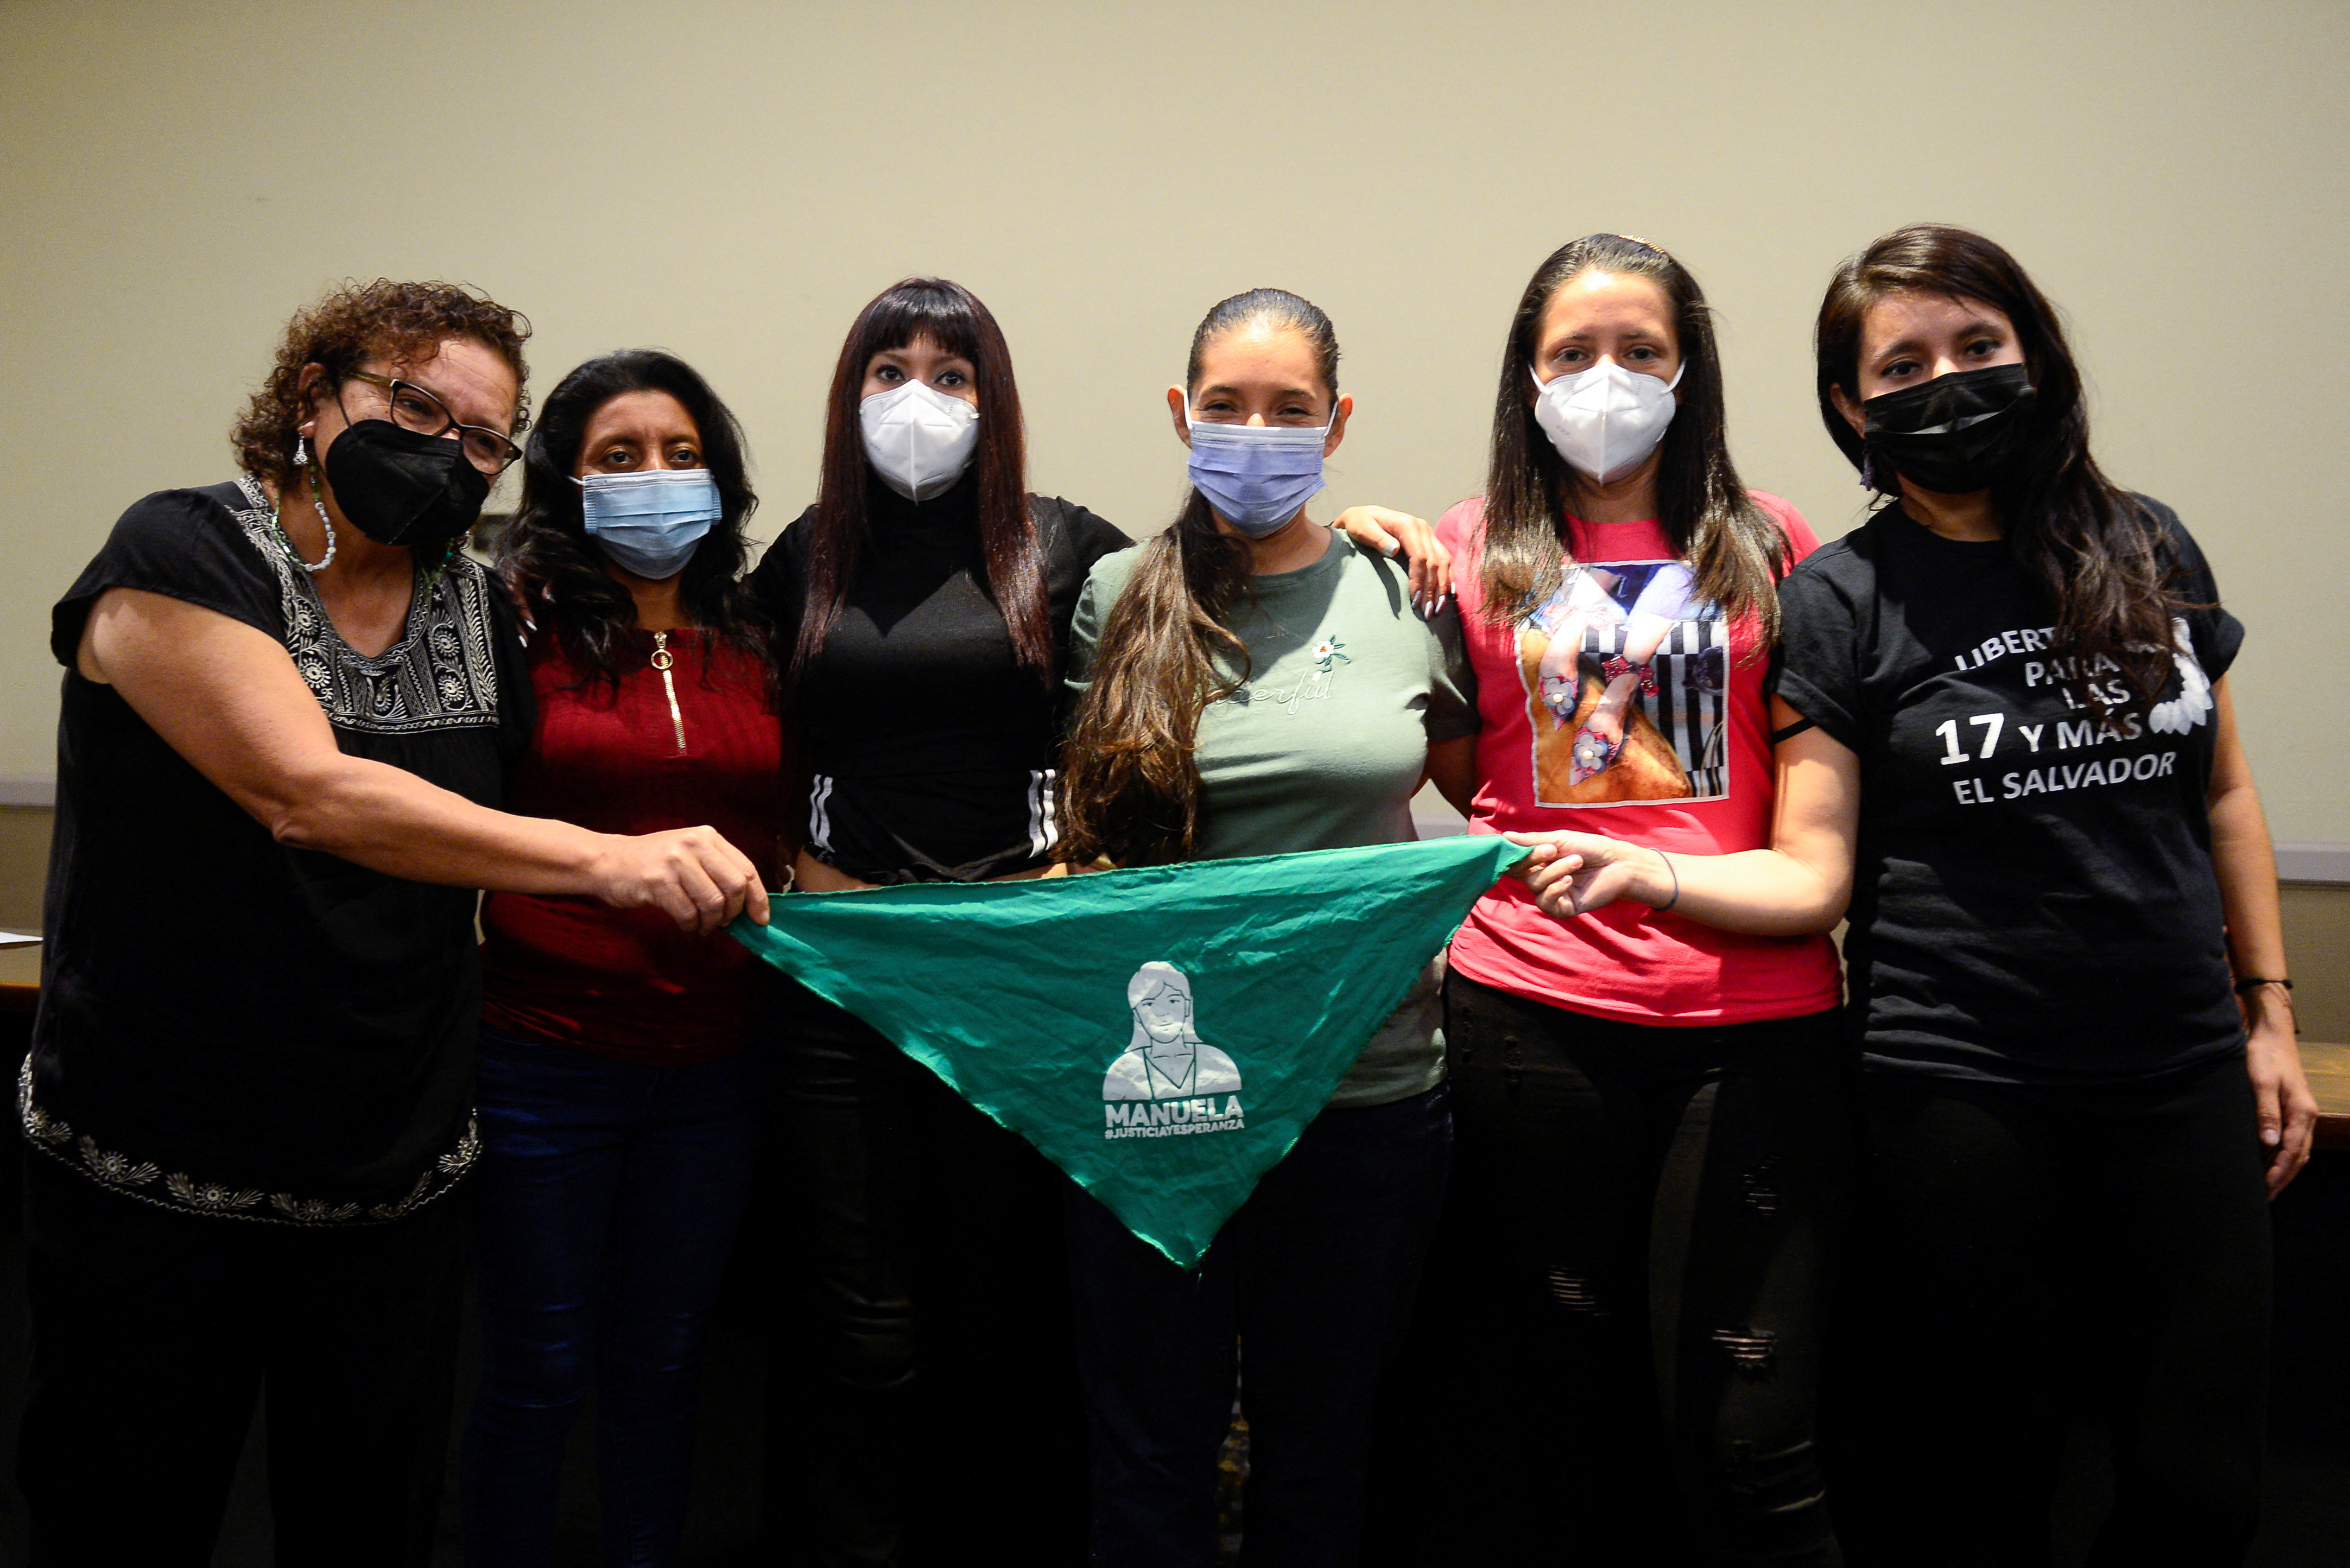 Women freed after convictions related to medical emergencies during pregnancy attend news conference, in San Salvador